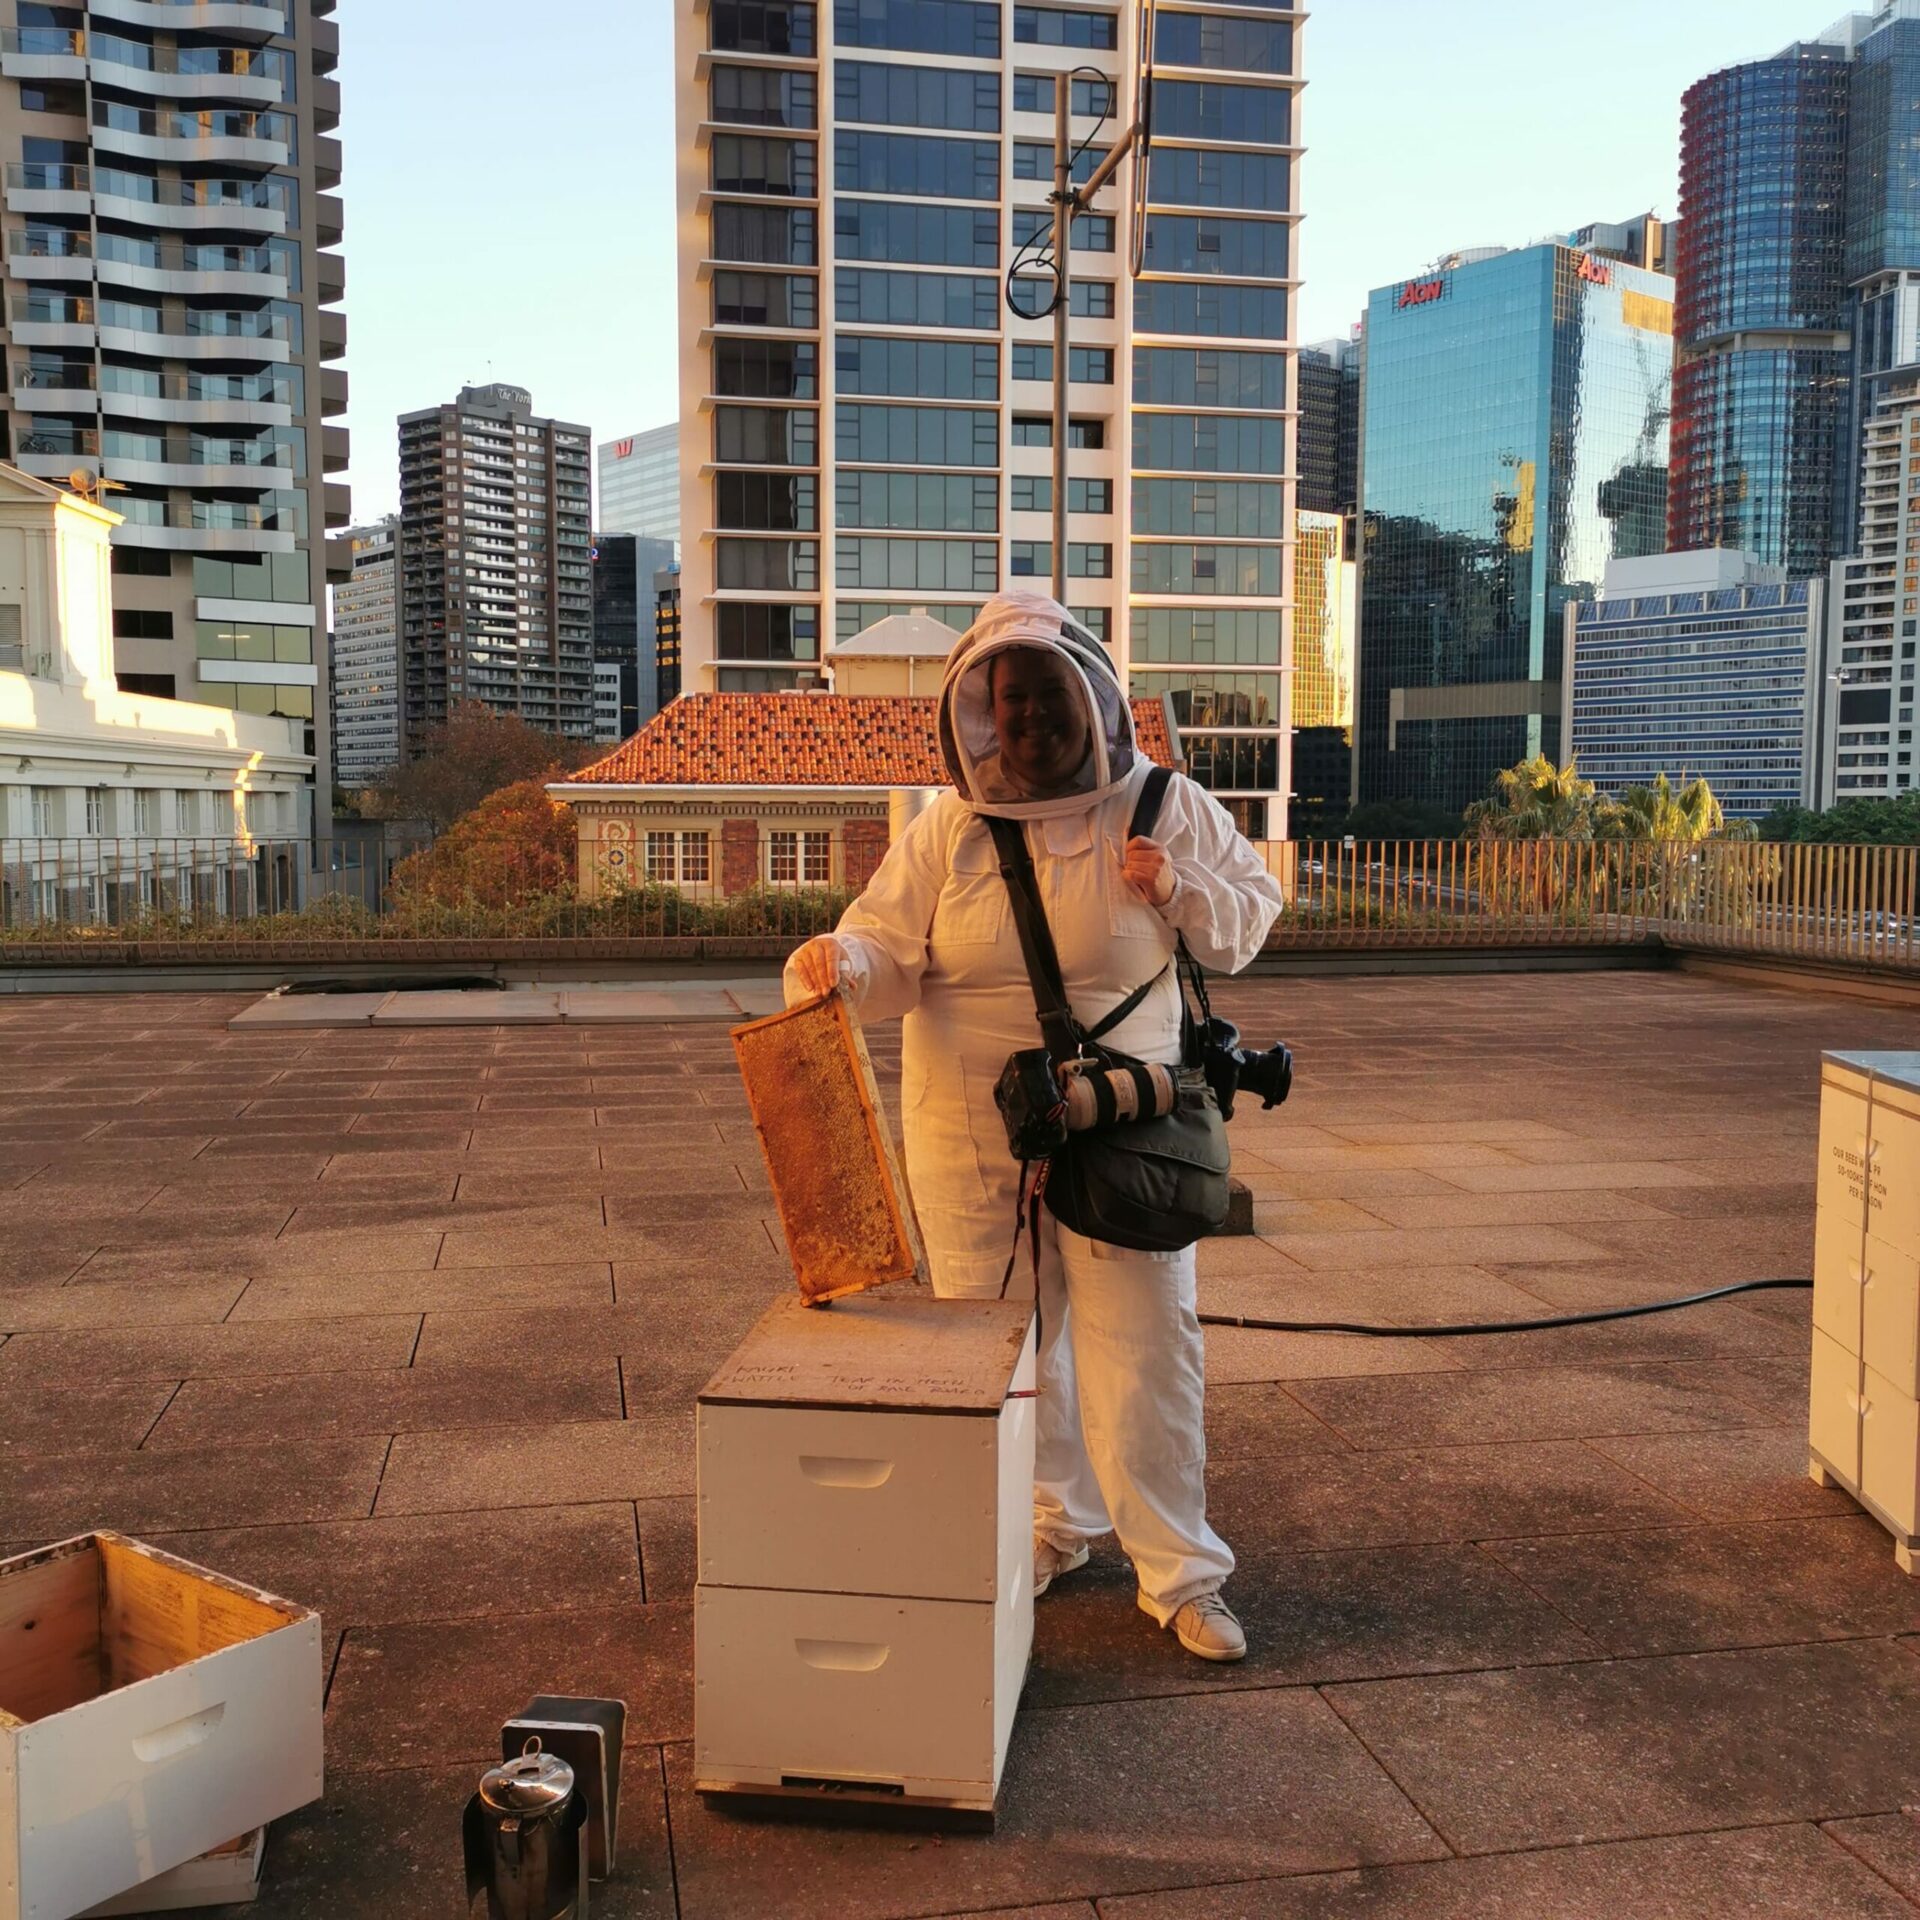 An Urban Beehive beekeeper tending to a rooftop hive in central Sydney